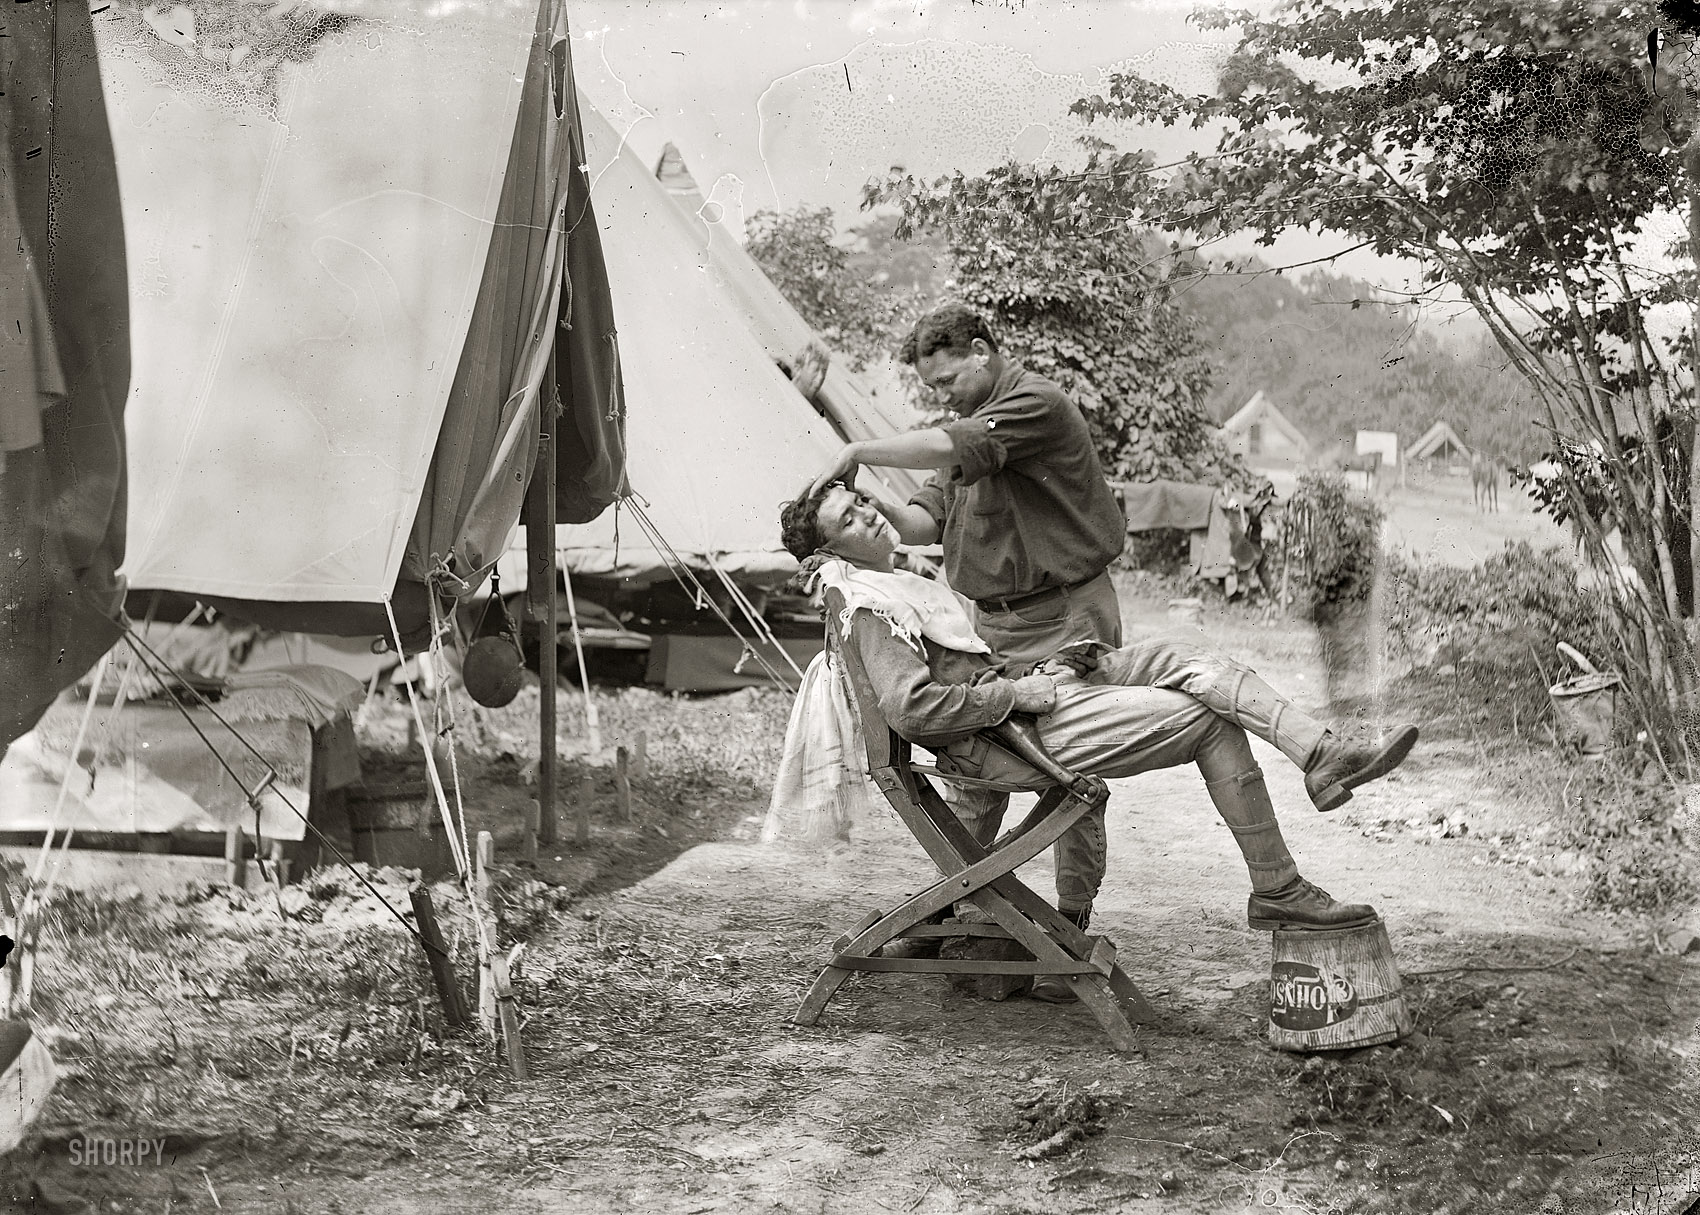 Circa 1914. "Army or National Guard camp." National Photo Co. View full size.